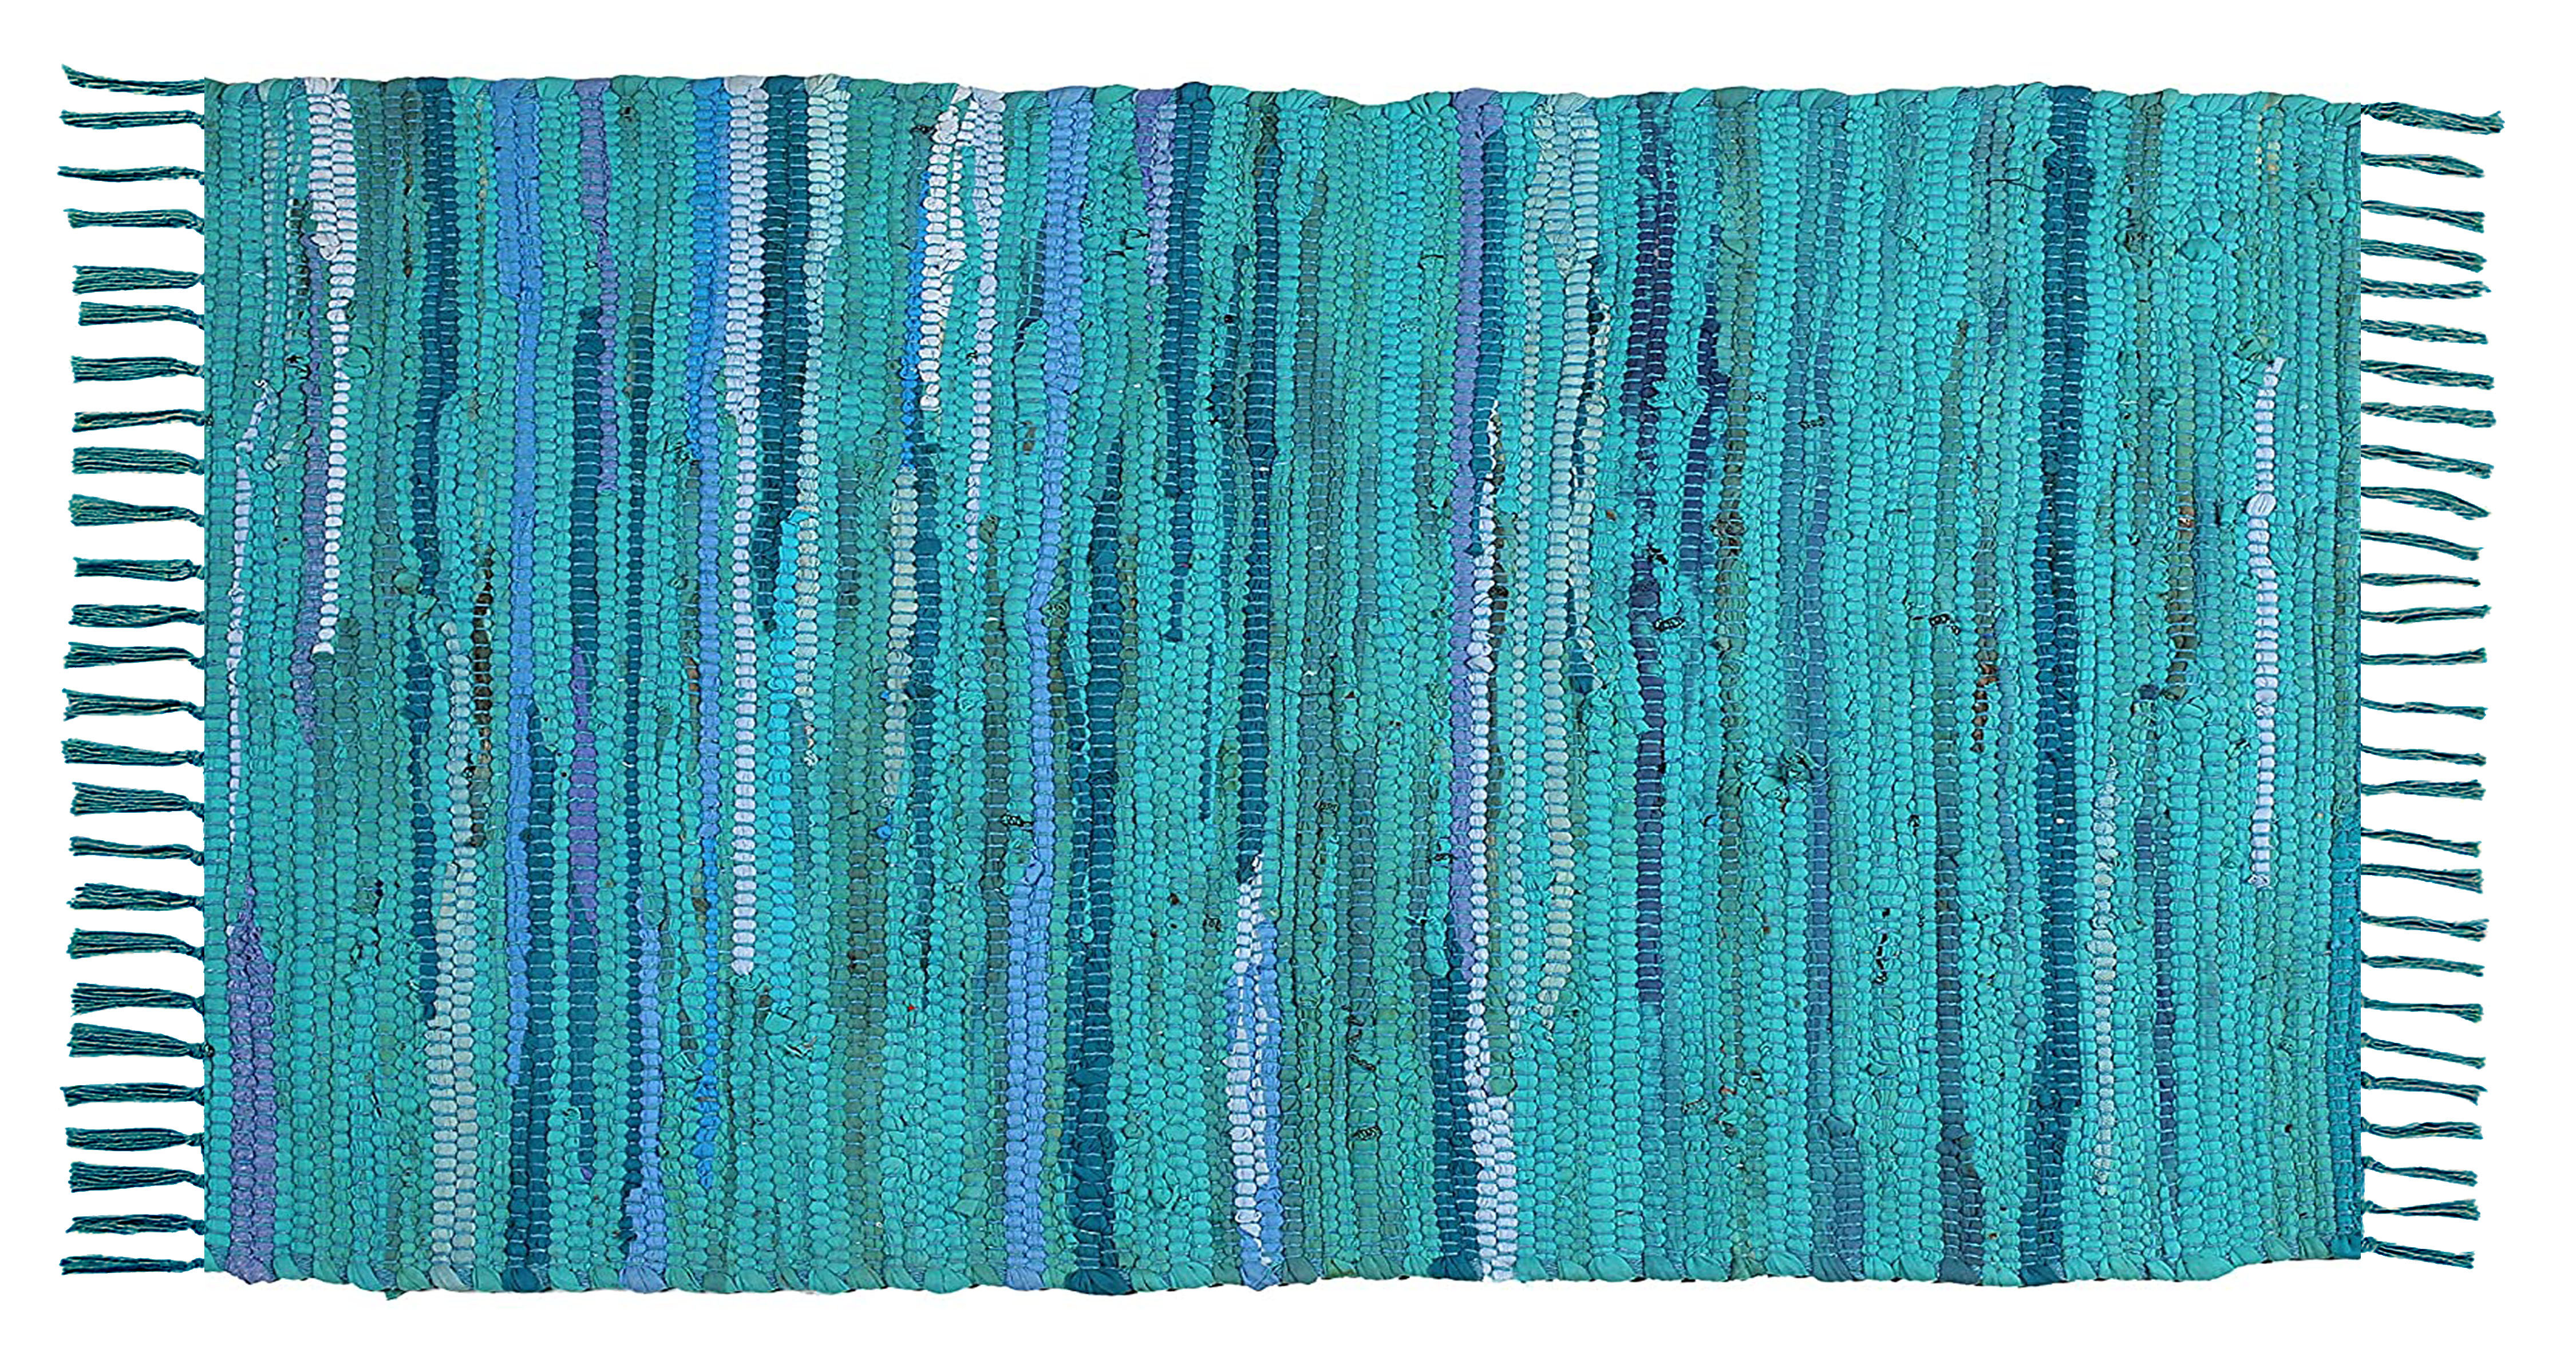 Allure Hand Made Rug Unique Chindi Recycled Cotton Rug Fabric Rug 70 x 140cm 